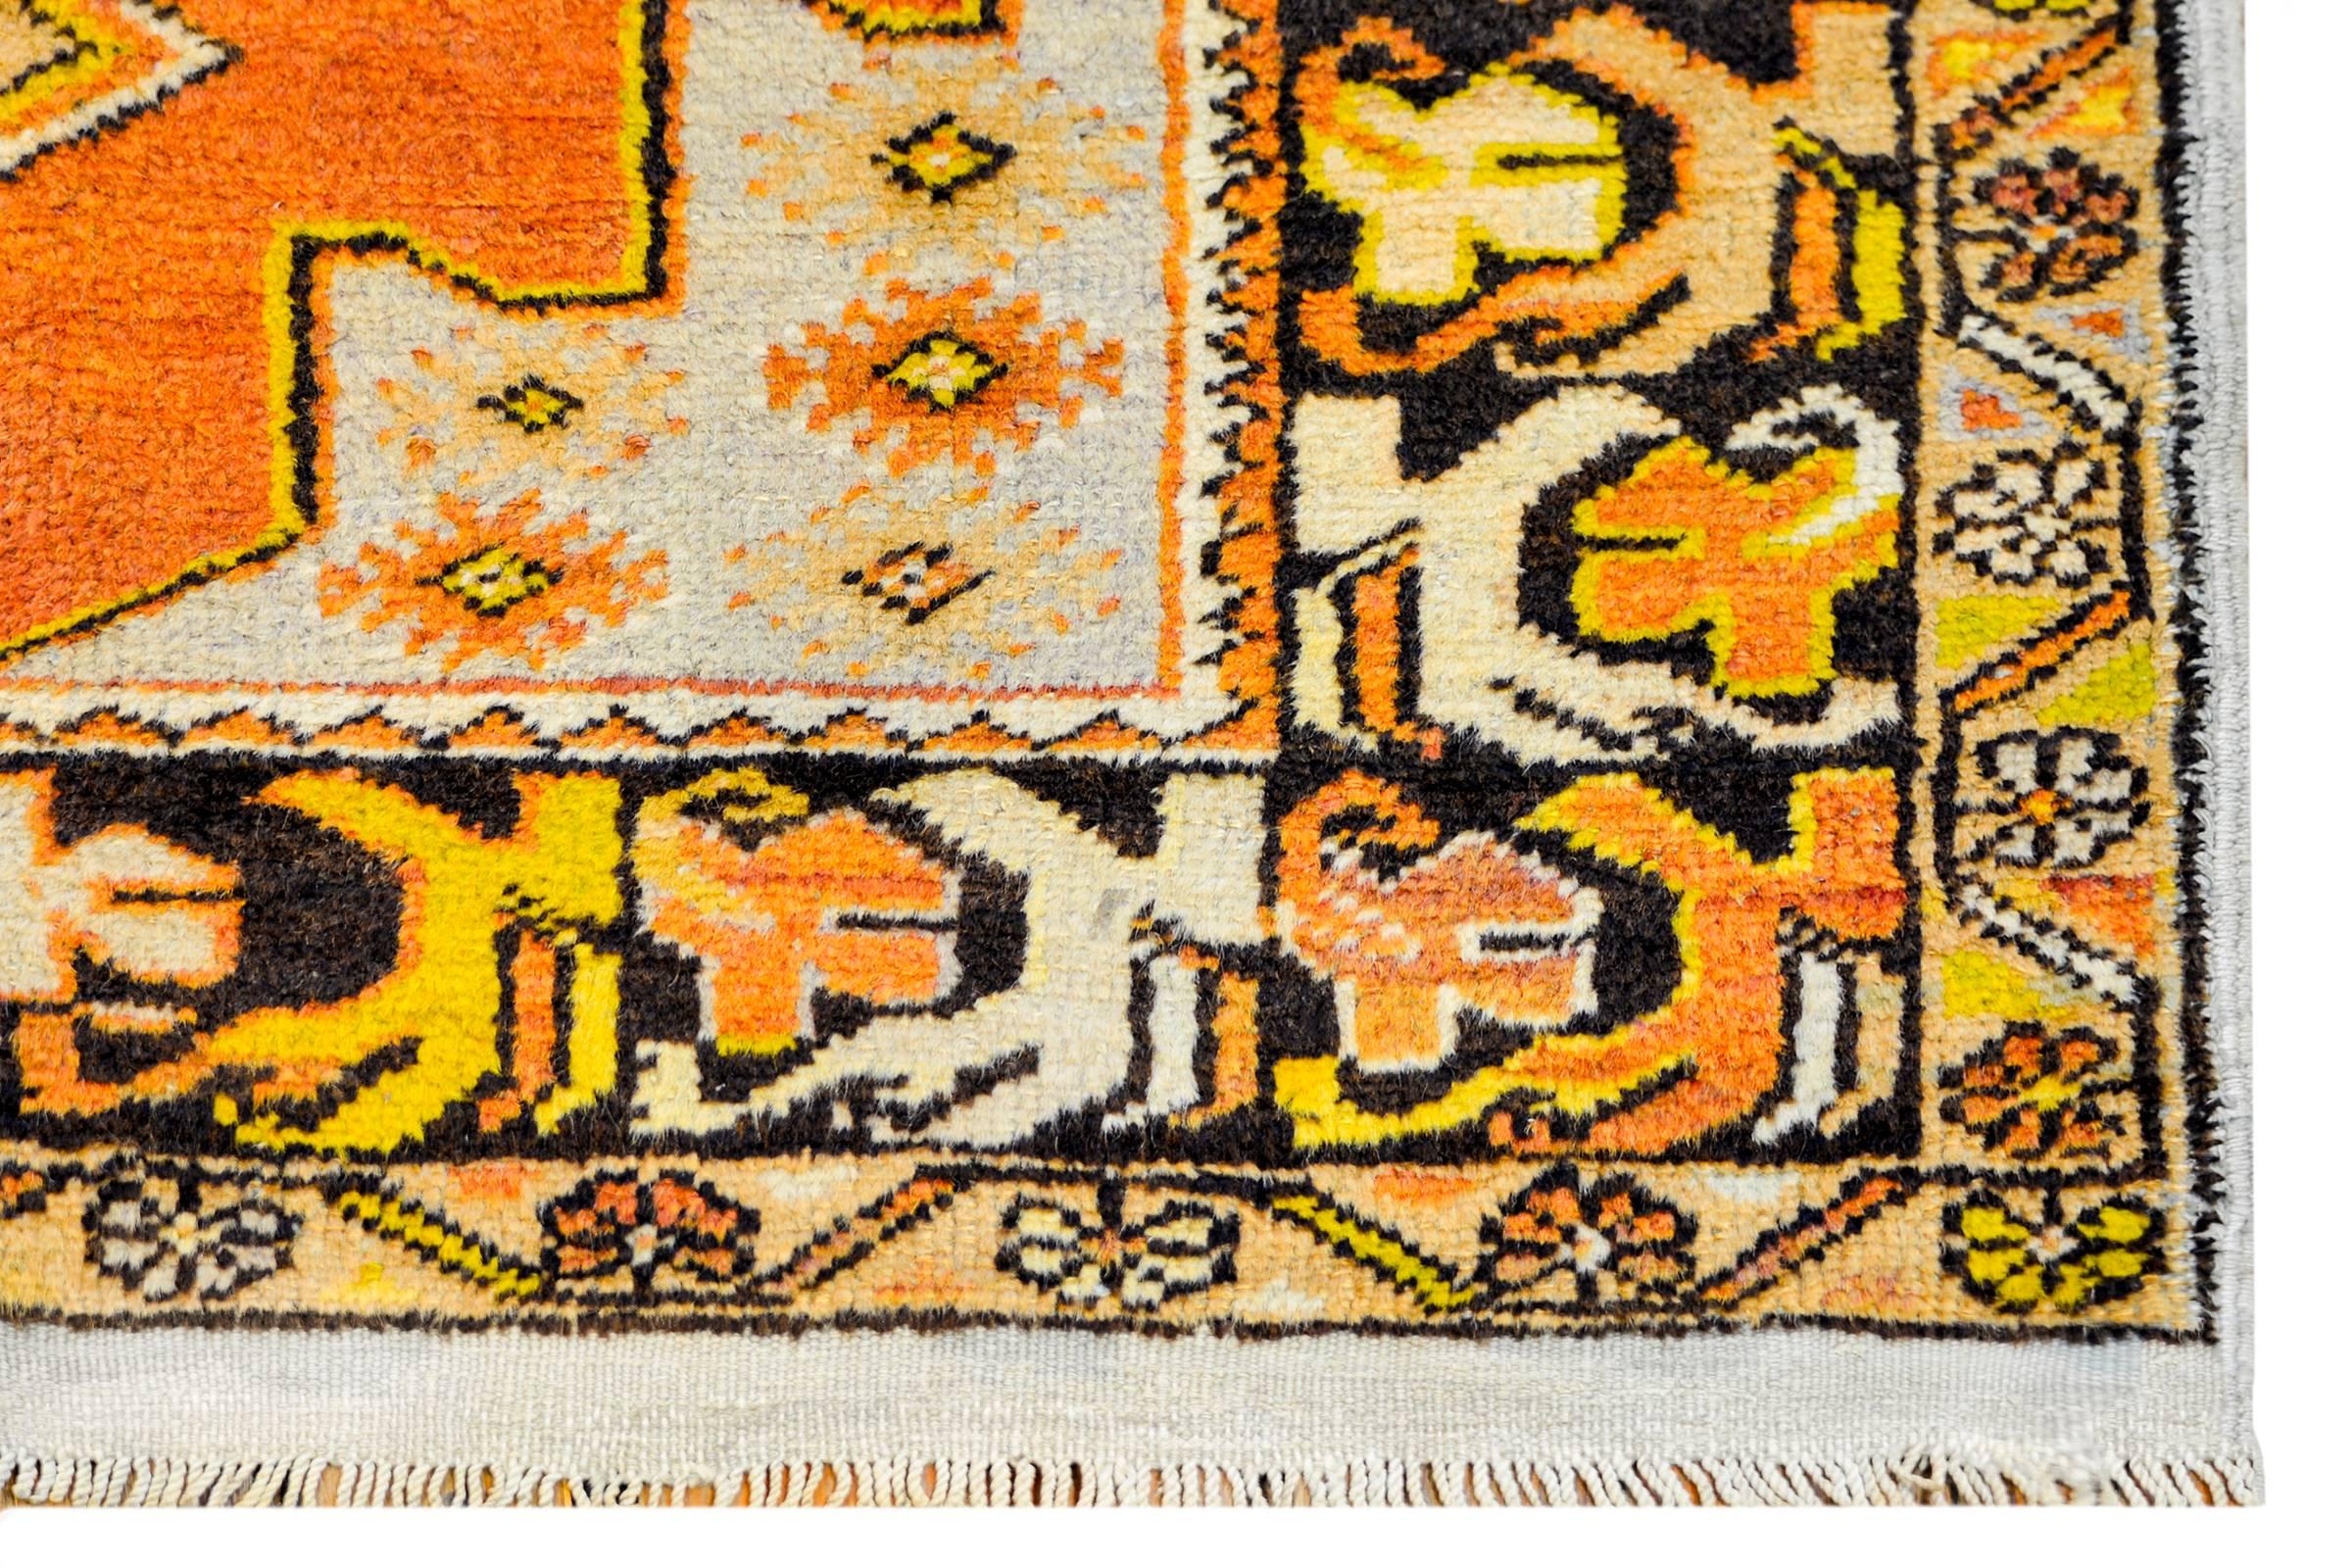 A vintage Turkish Oushak rug with a beautiful pattern woven in orange, gold, brown, and cream colored wool. The border is exceptional, with large-scale wide stylized floral and leaf patterned stripe flanked by a petite floral and vine pattern.